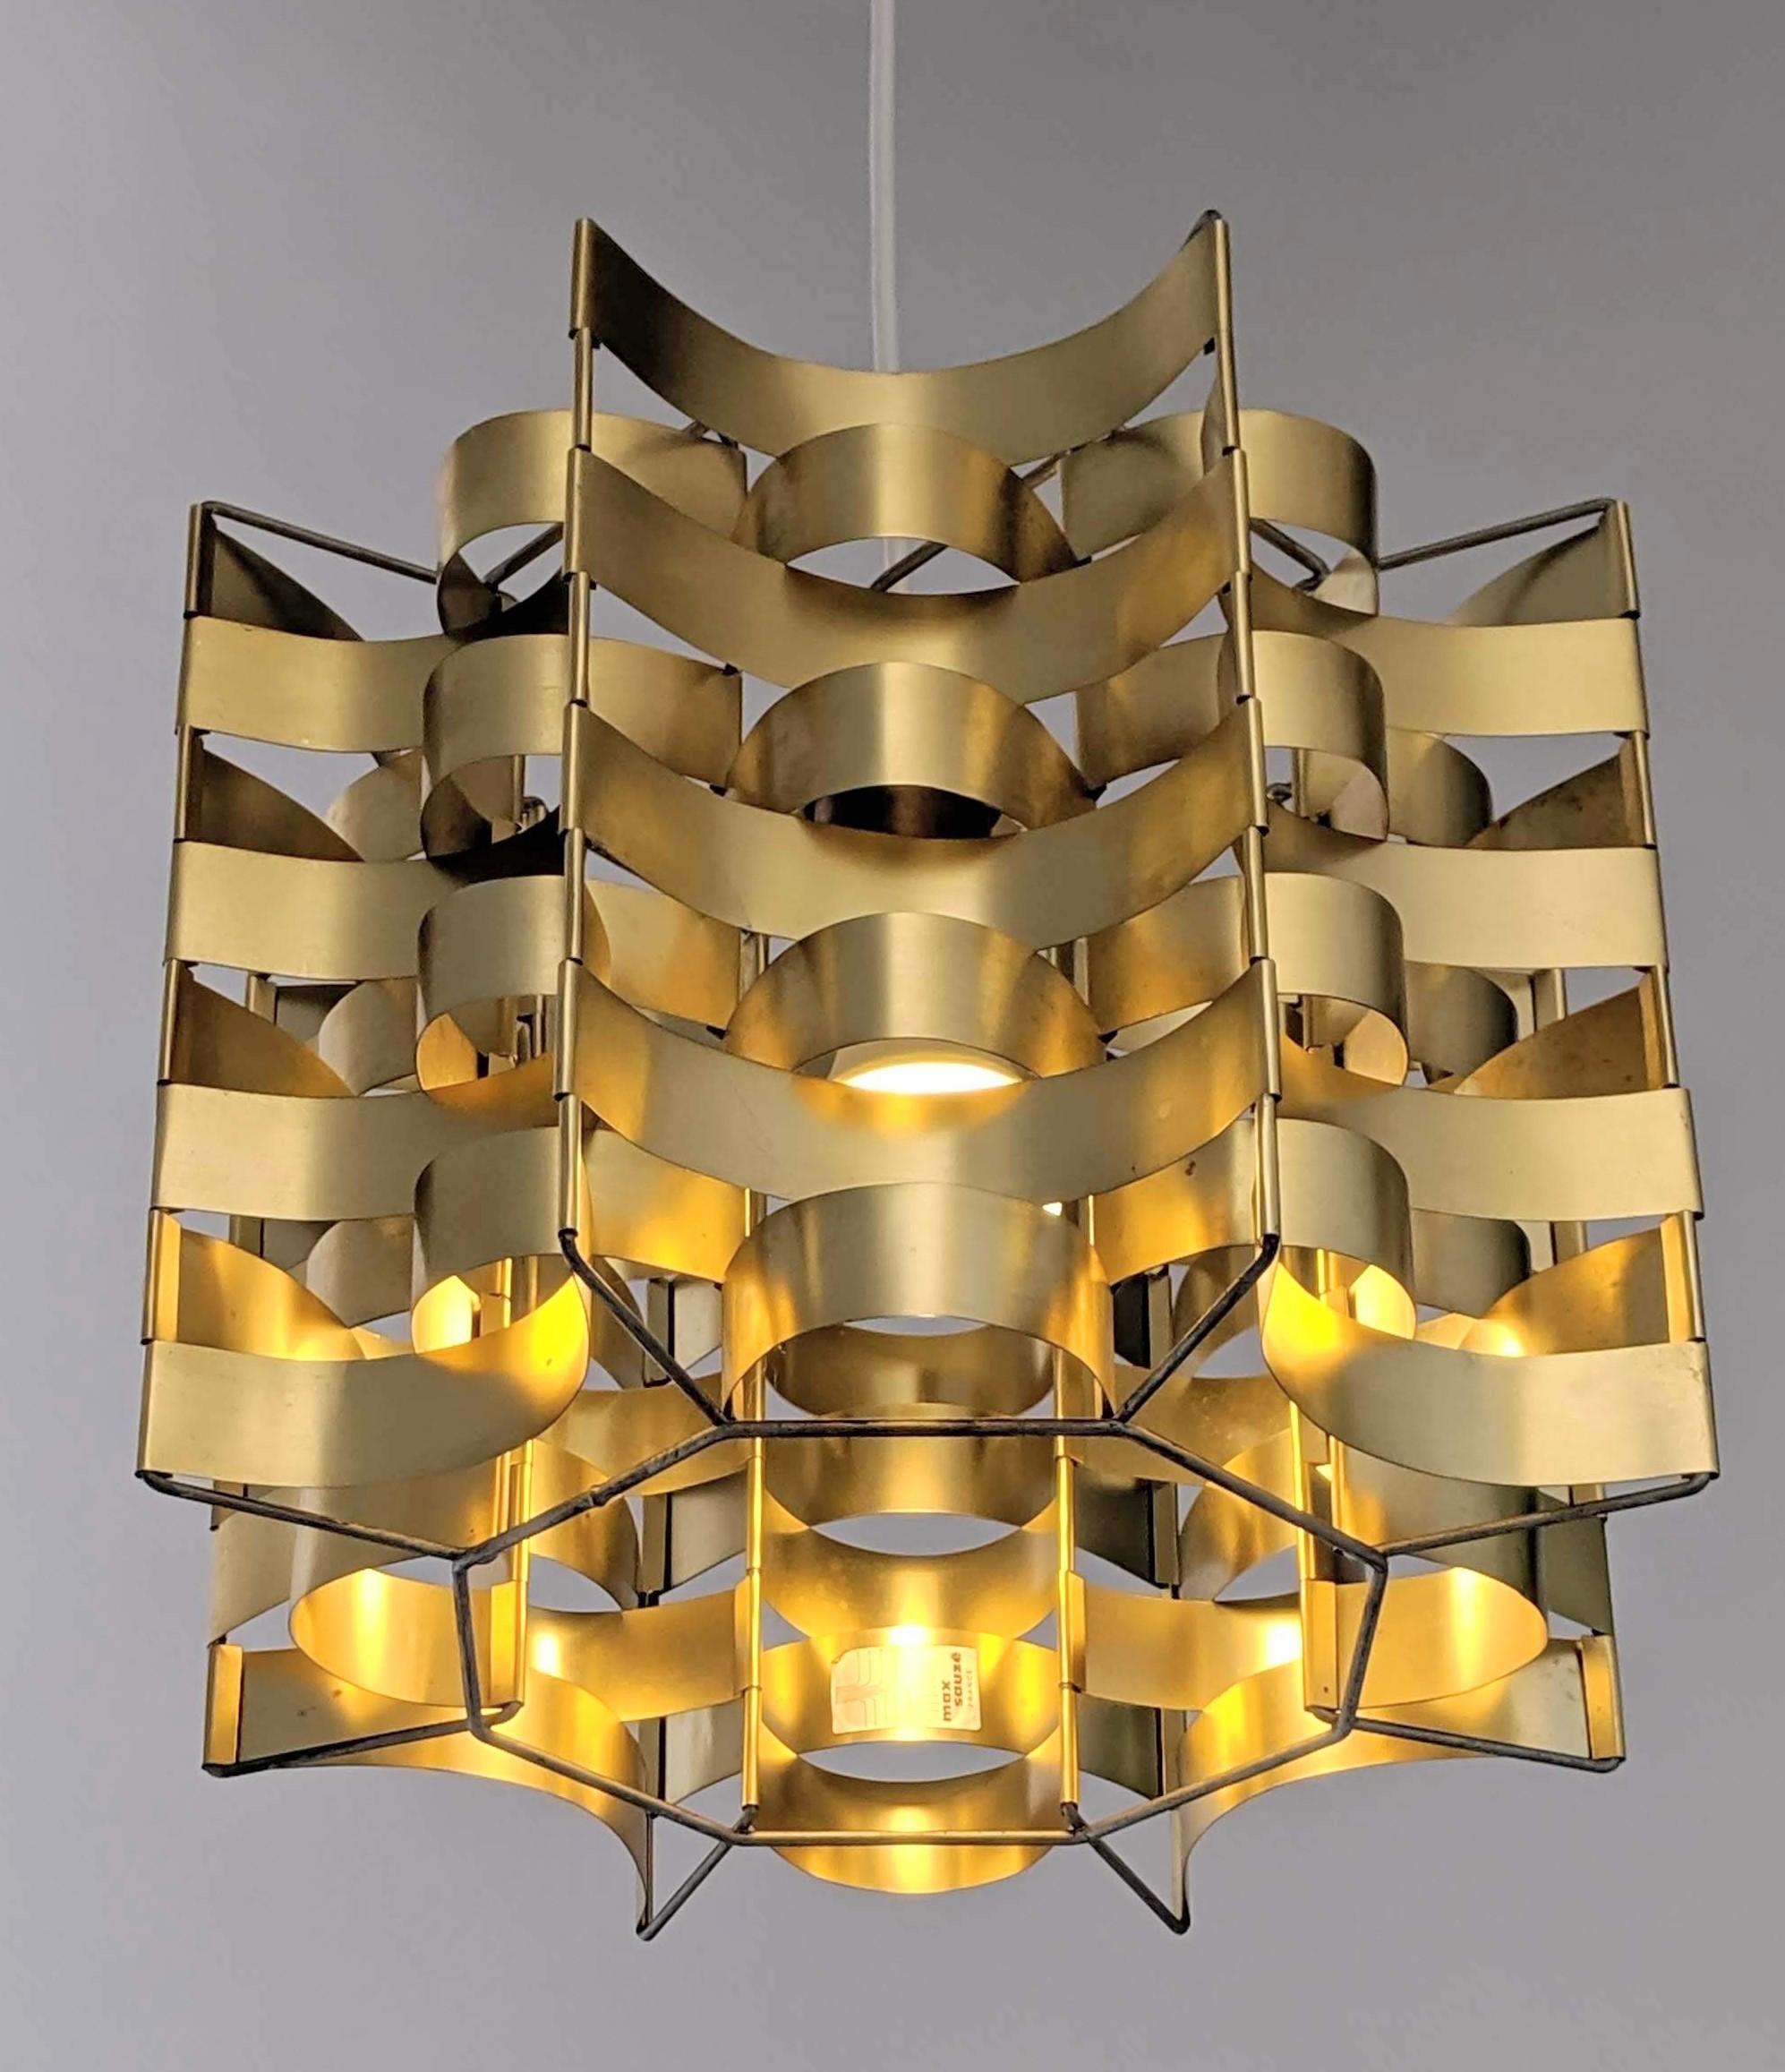 Iconic pendant from Max Sauze made of anodized brass aluminum strip on metal wire frame. 

Contain one E26 size socket.

Come with 5 feet of cord with canopy.